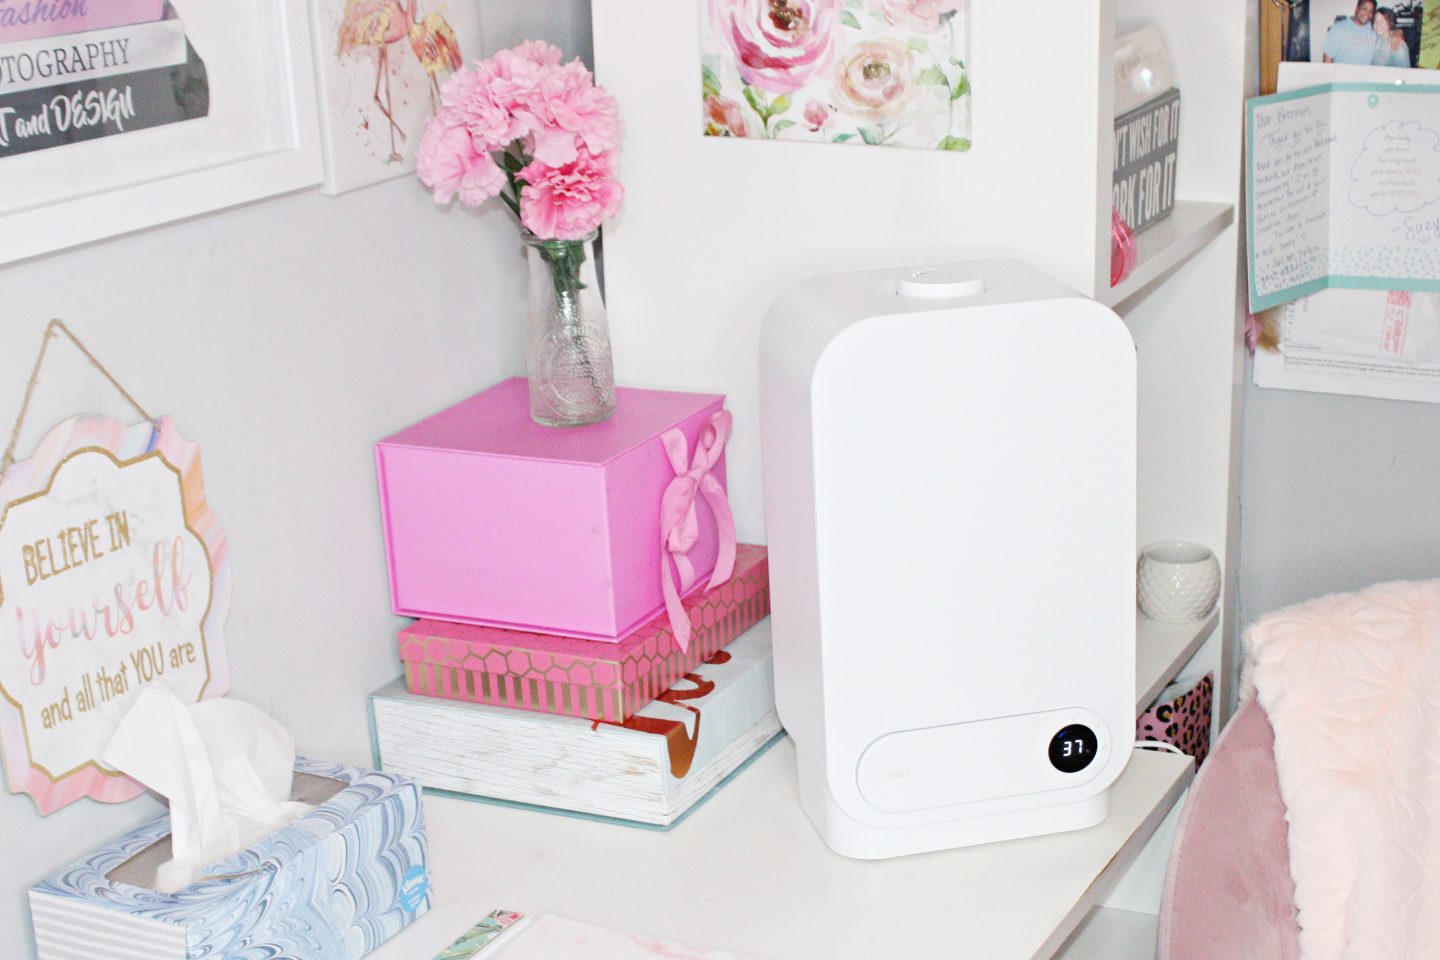 Choosing the Best Humidifier for My Office
